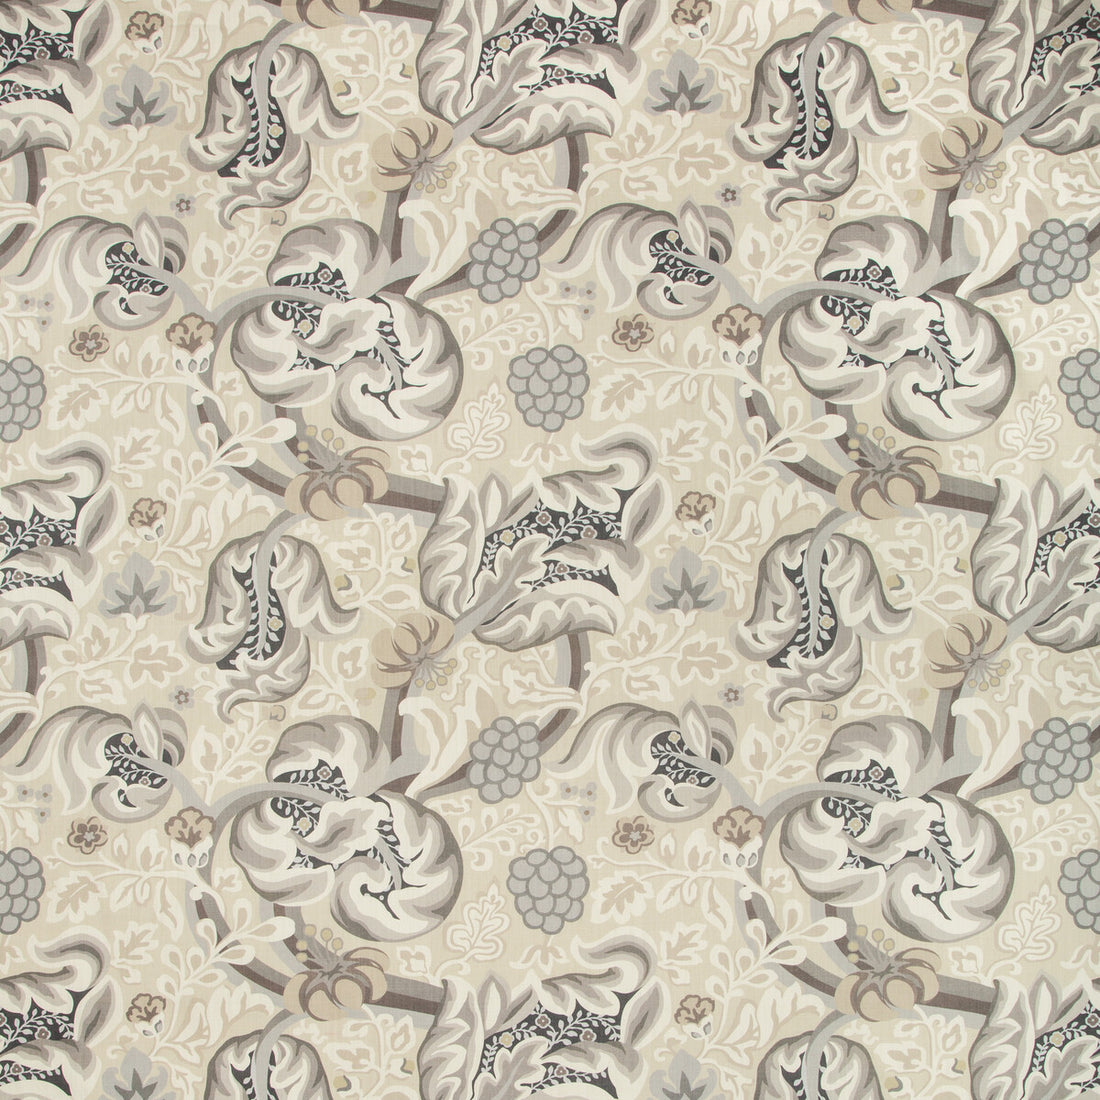 Hullabaloo fabric in quarry color - pattern HULLABALOO.11.0 - by Kravet Basics in the Bermuda collection